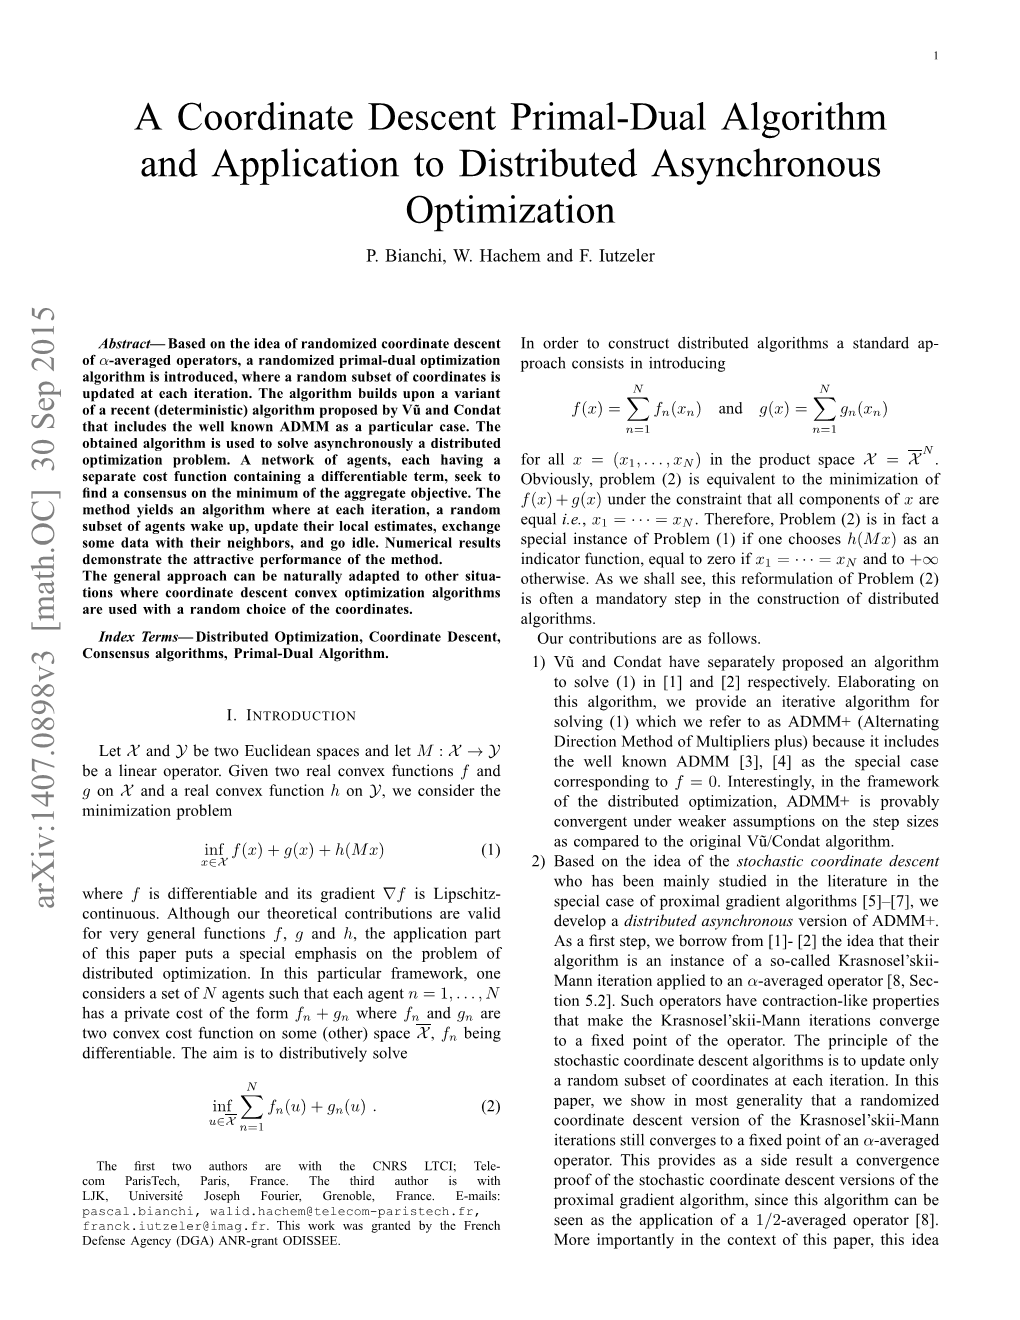 A Coordinate Descent Primal-Dual Algorithm and Application To